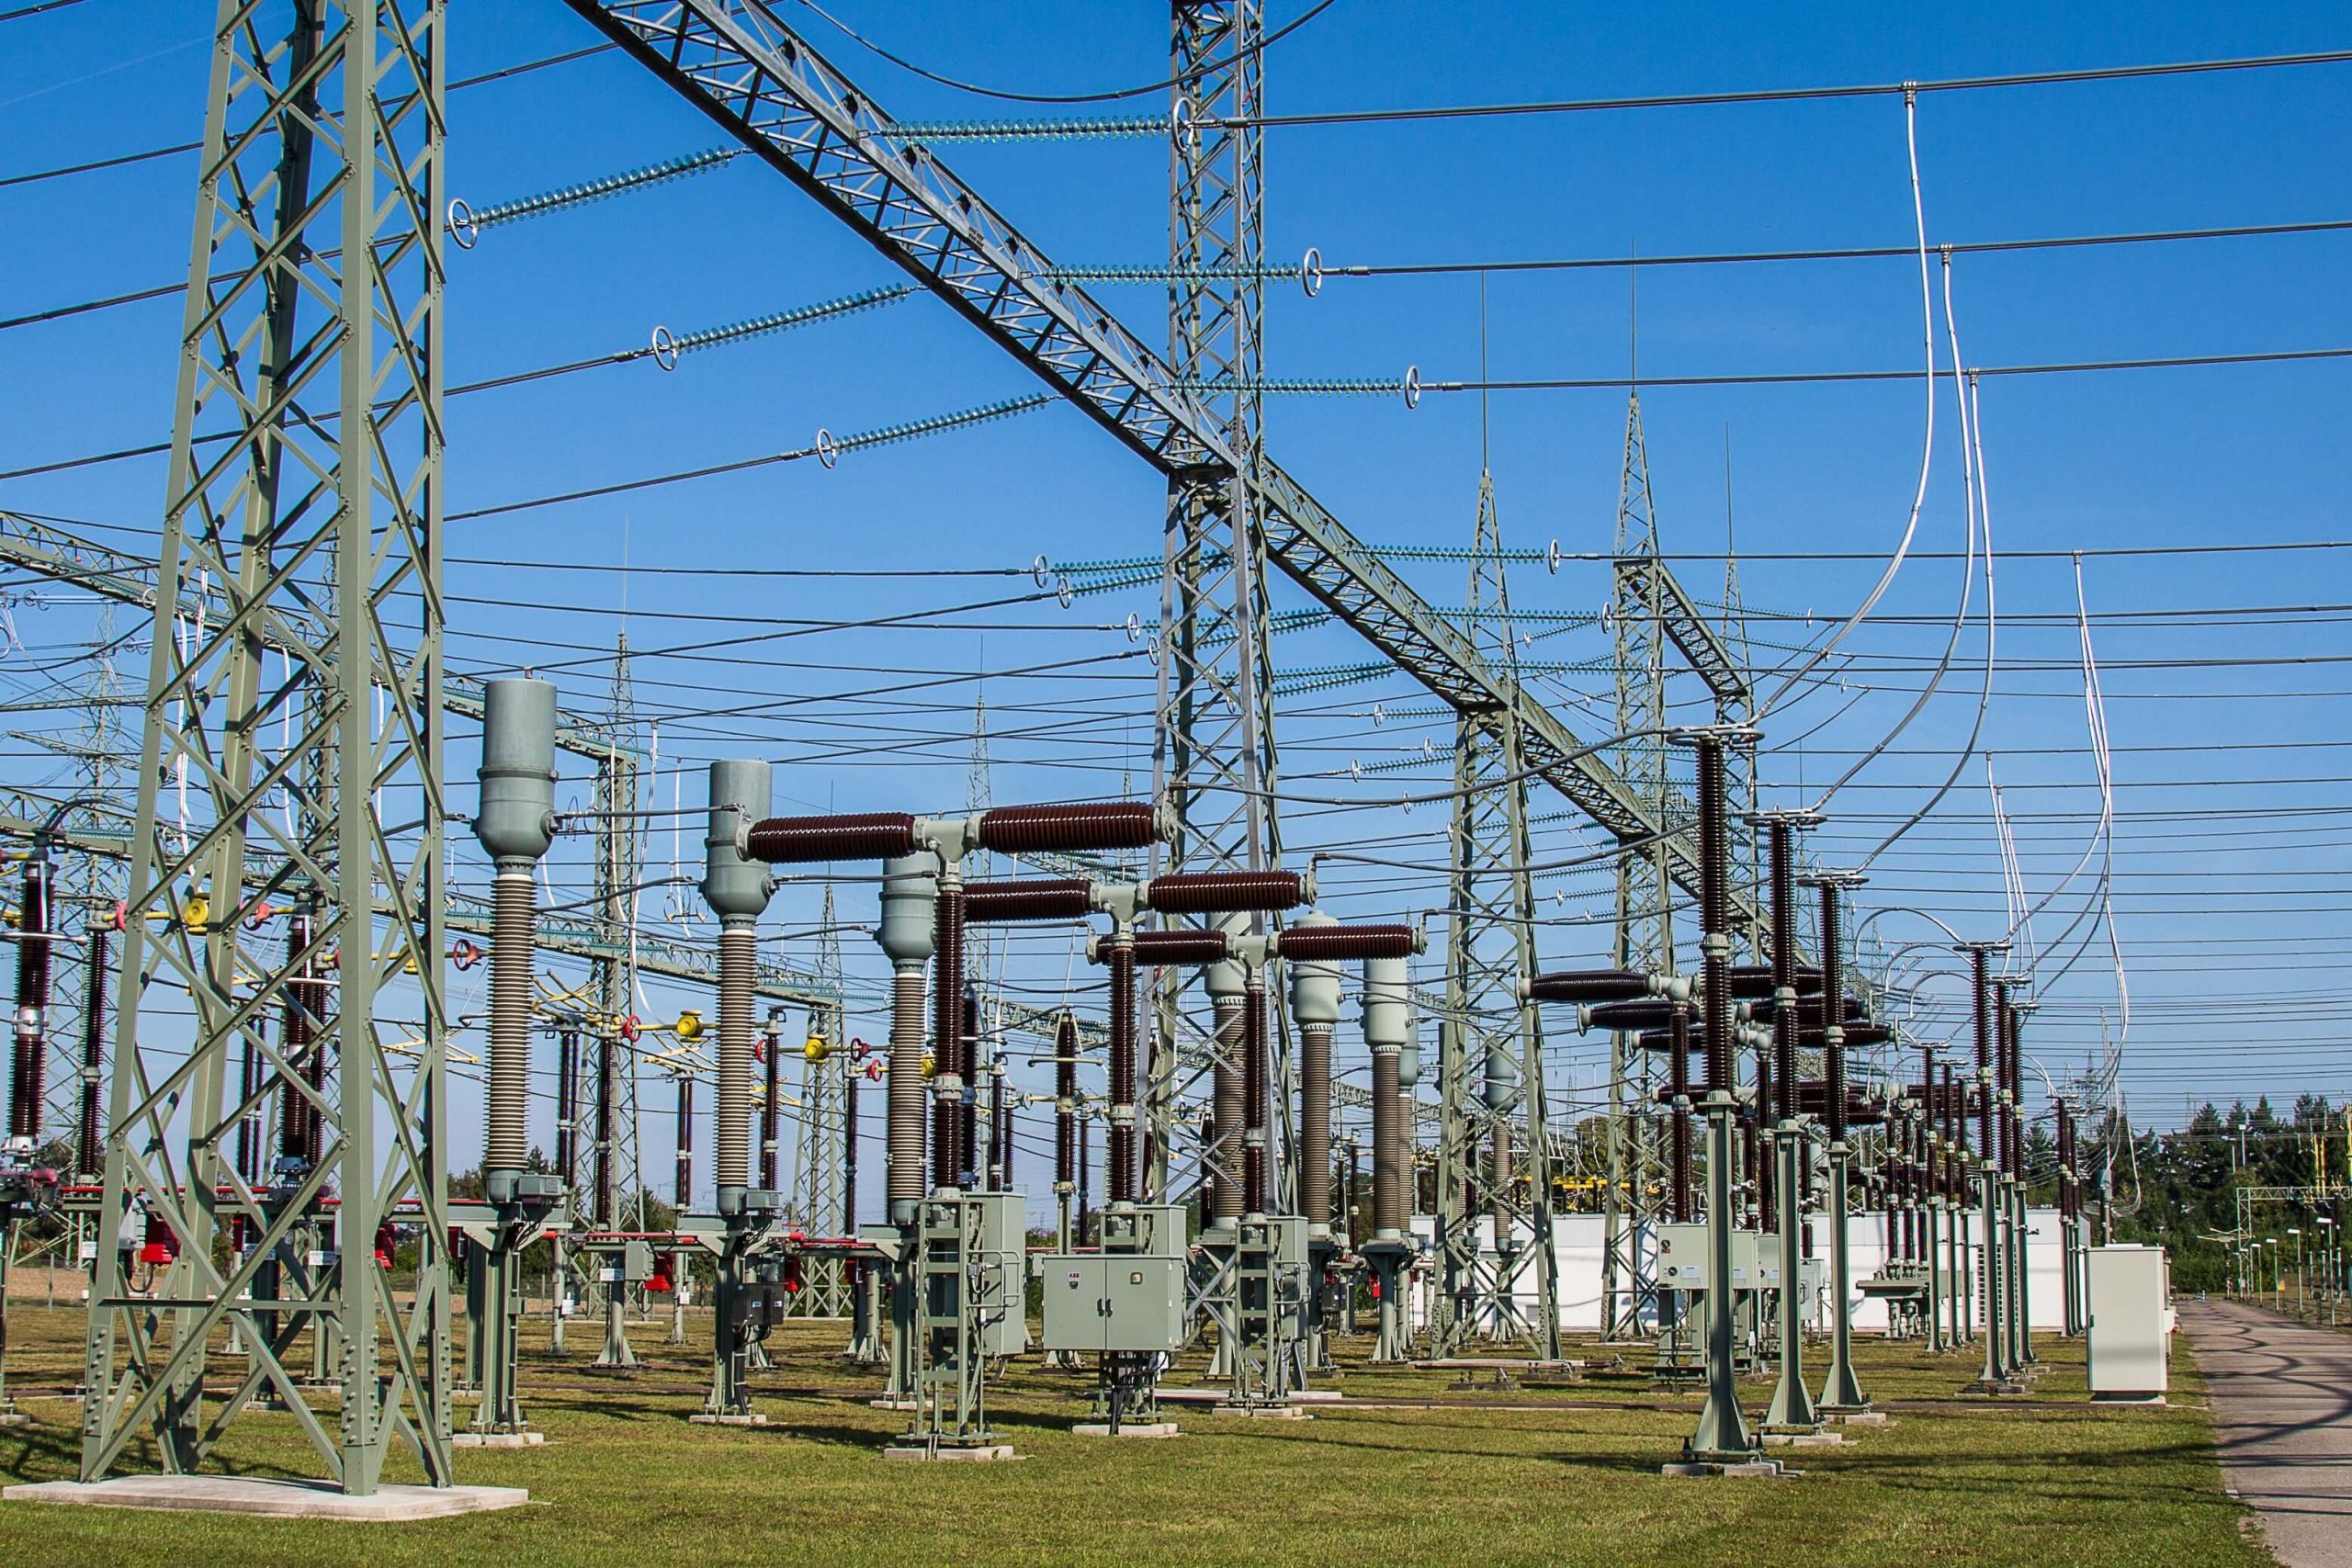 The United States has announced a $23 million electricity project in Pakistan